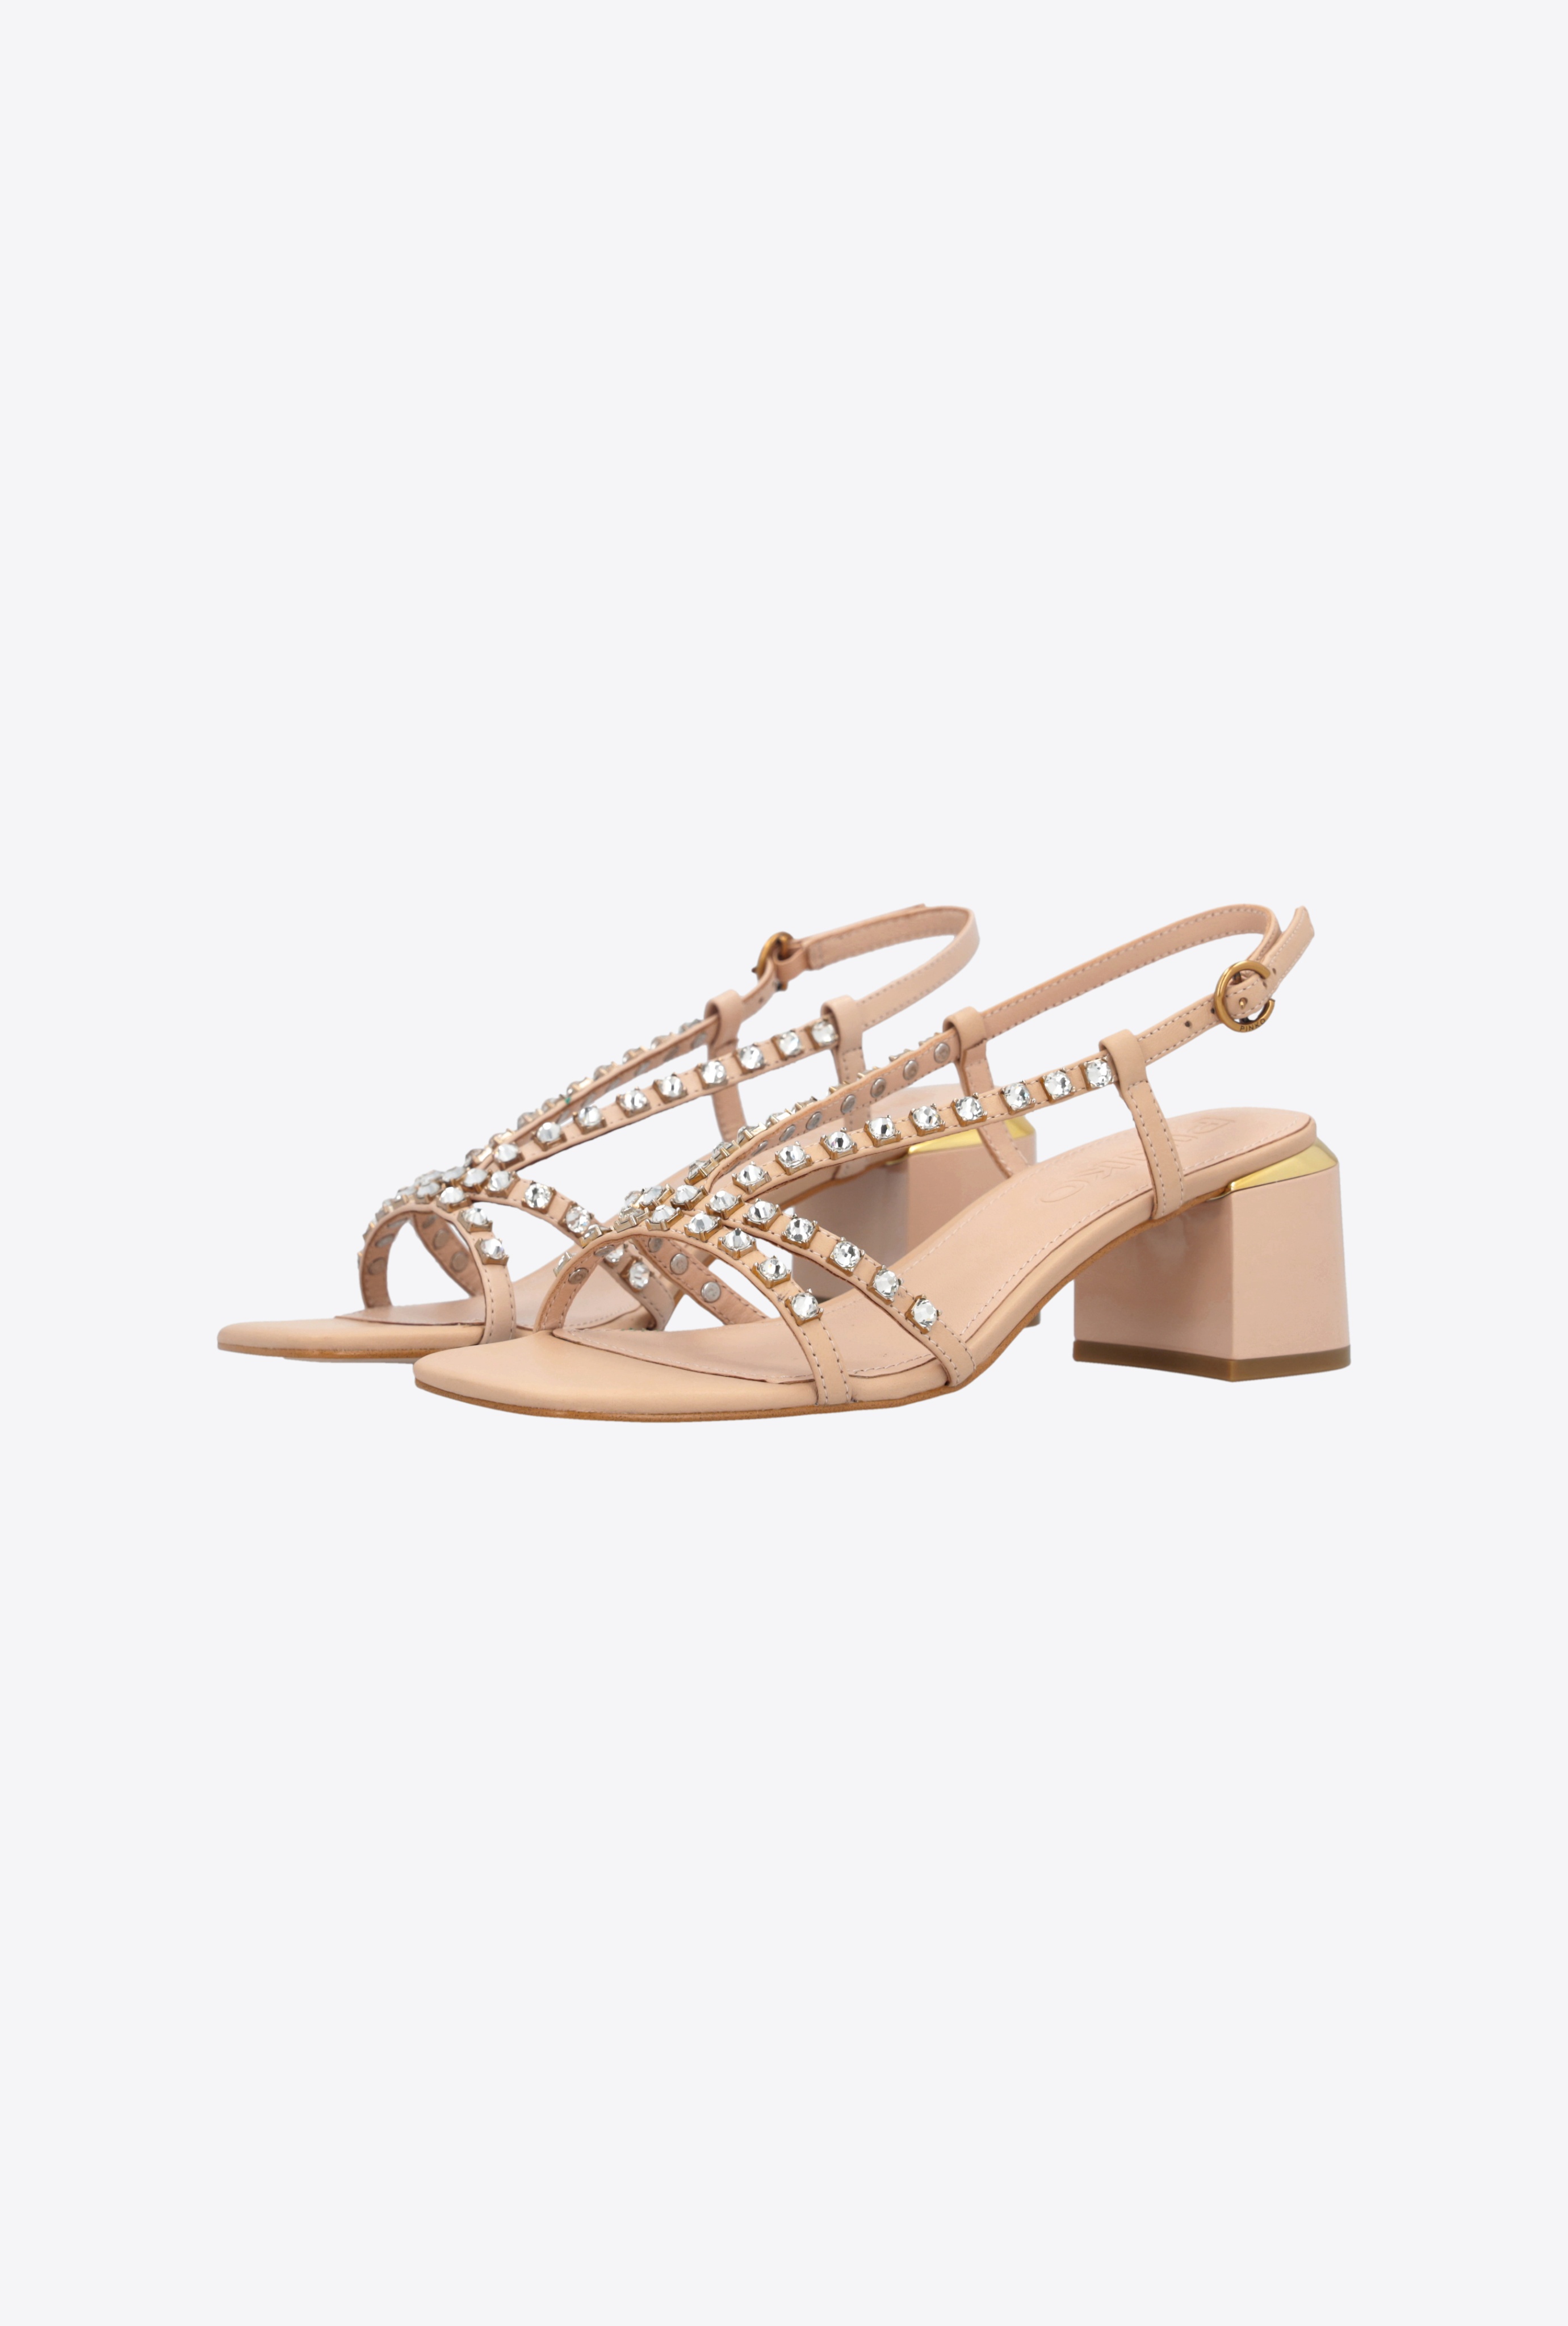 NAPPA LEATHER SANDALS WITH GOLDEN HEEL - 6